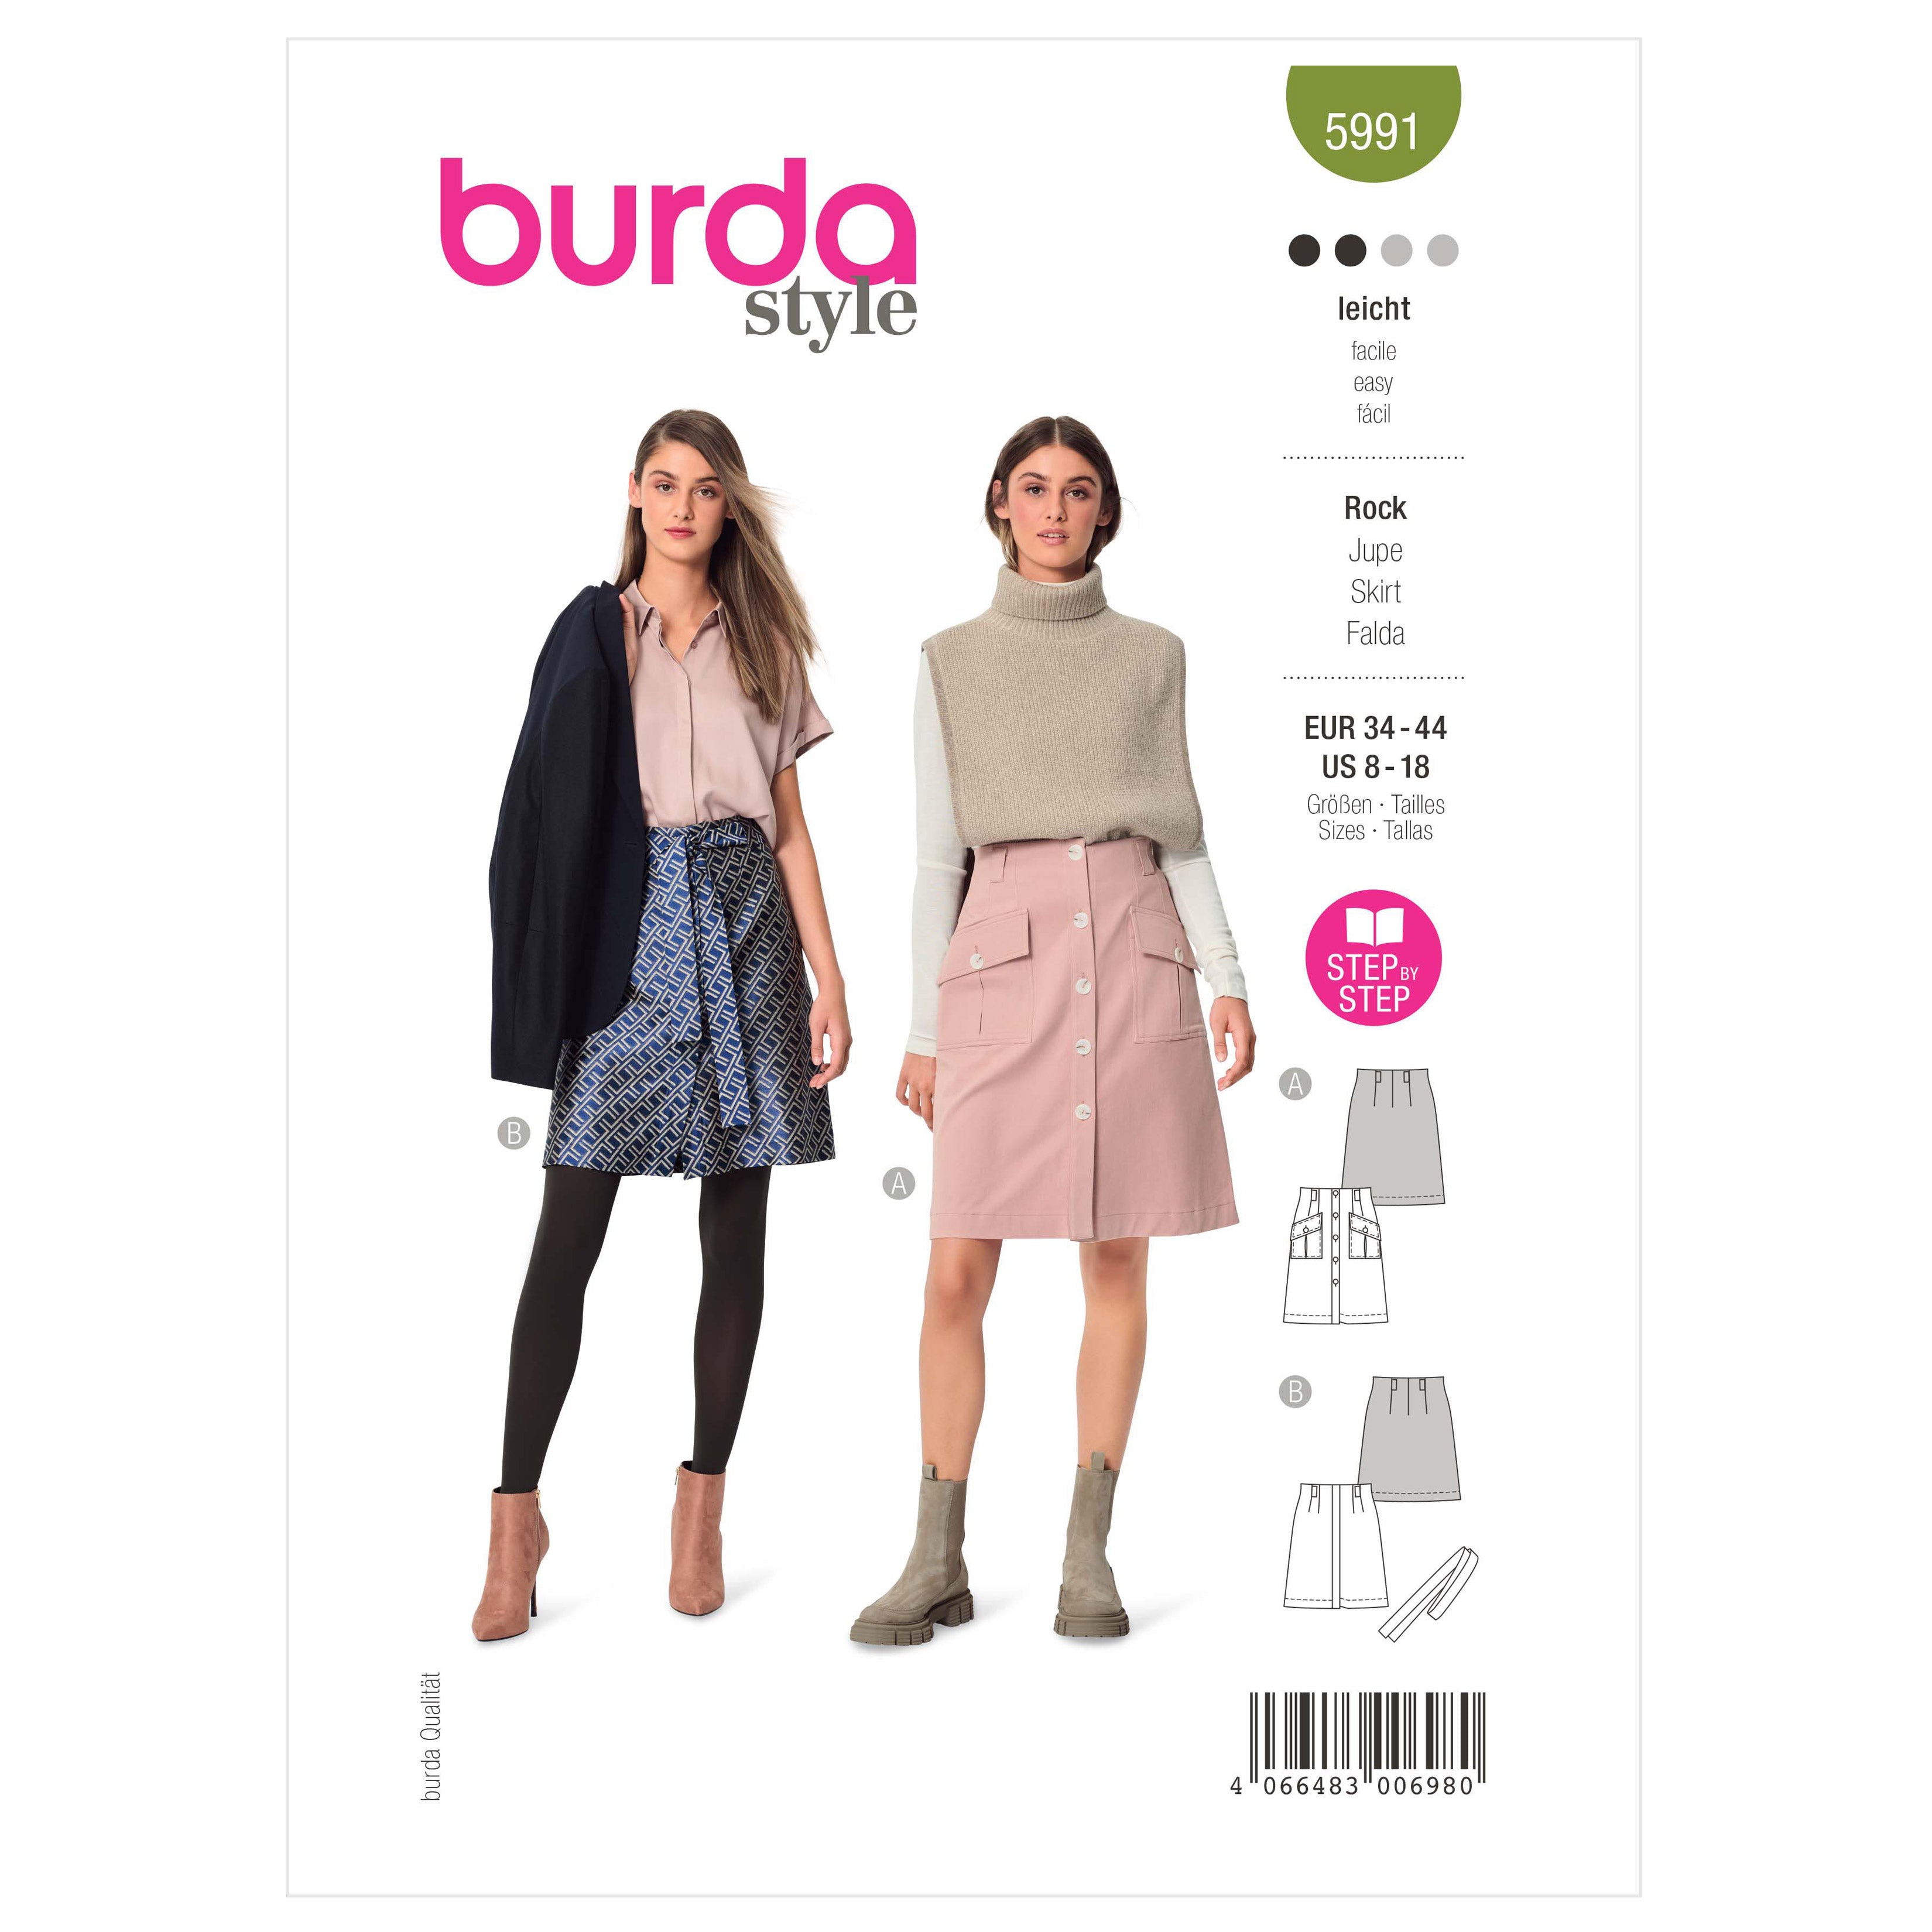 Burda Sewing Pattern 5991 Misses' Front Fastening Flared Skirt from Jaycotts Sewing Supplies